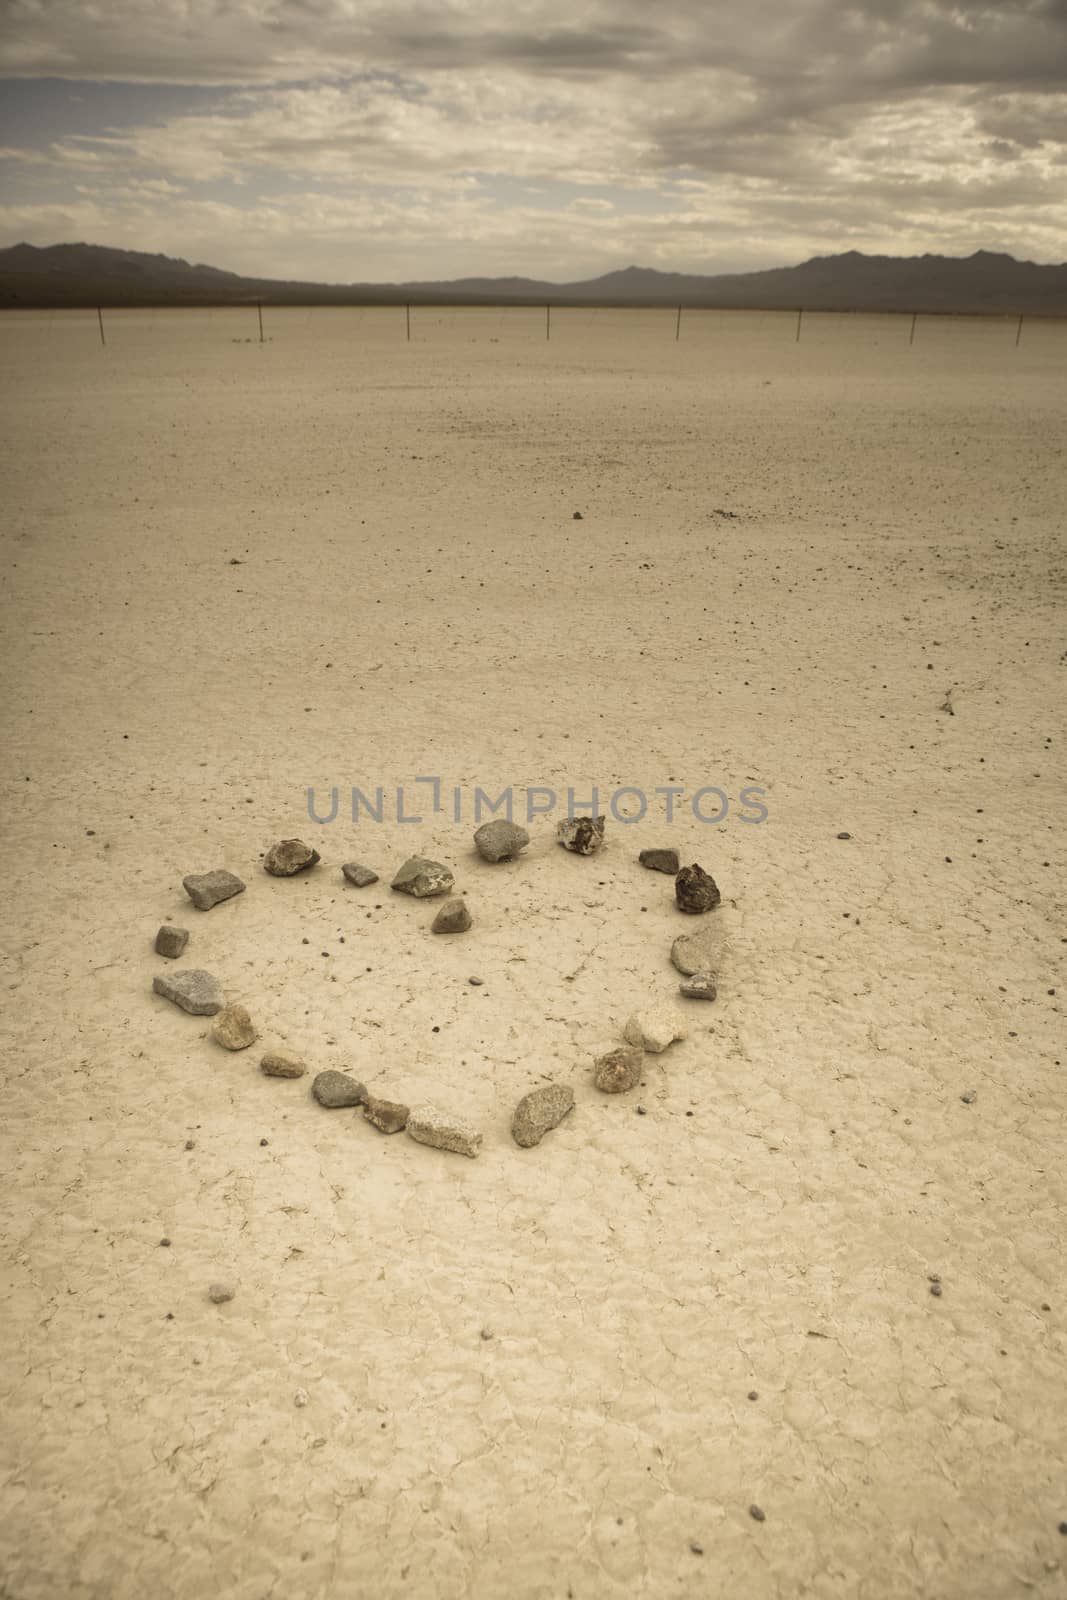 Heart shape made with stone in the desert of Nevada. Retro style image